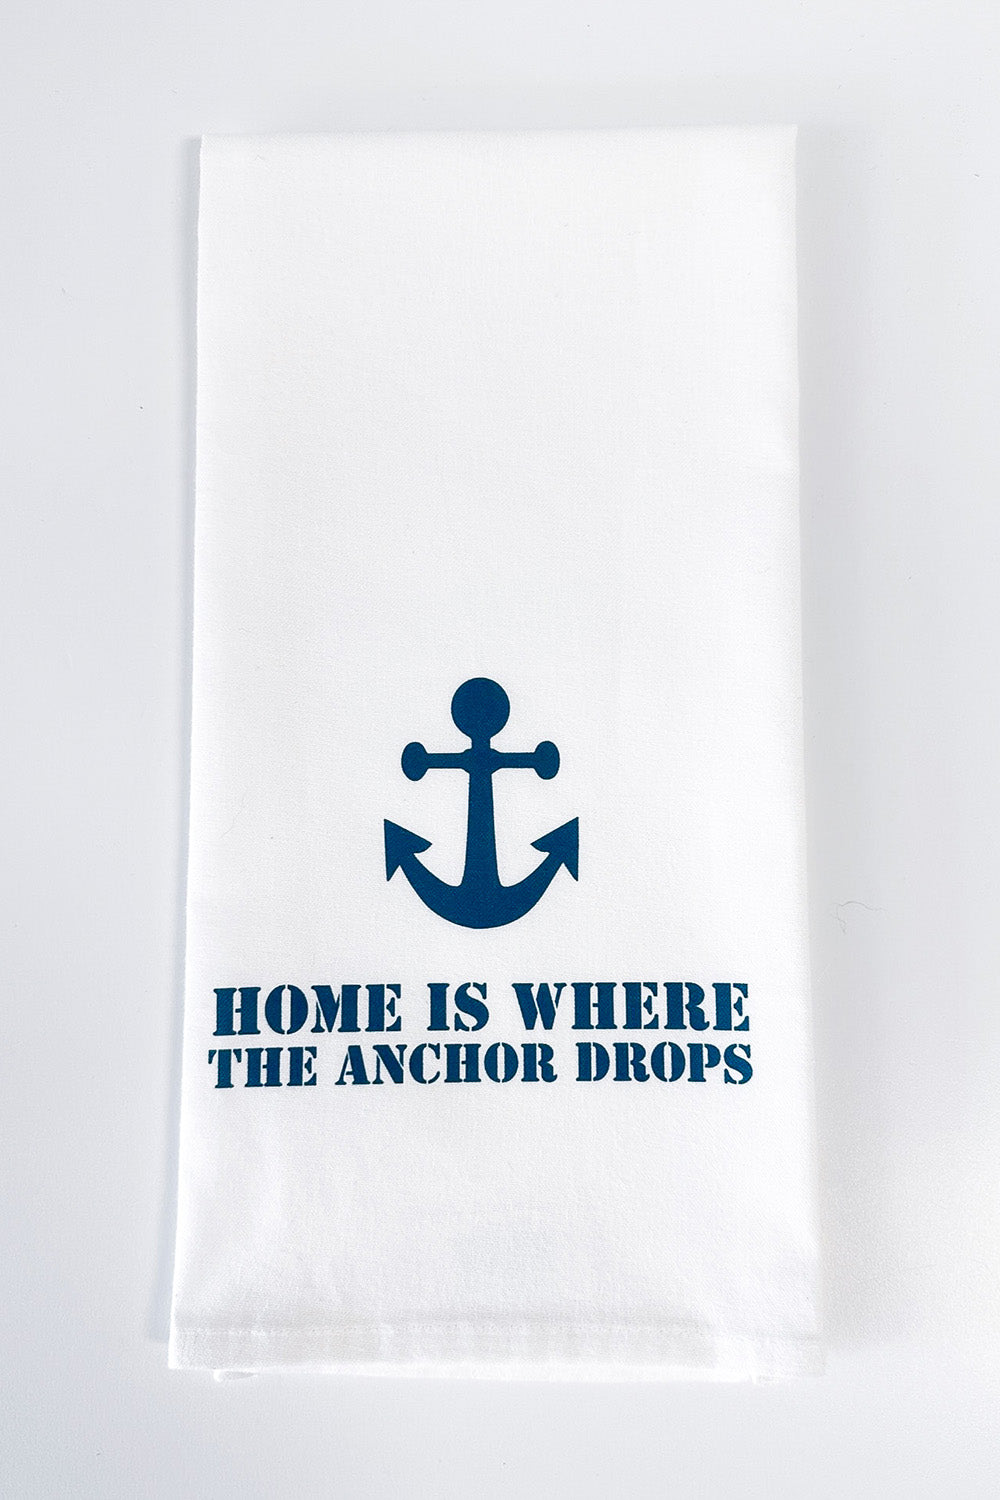 Decorative Tea Towel - Home is Where the Anchor Drops